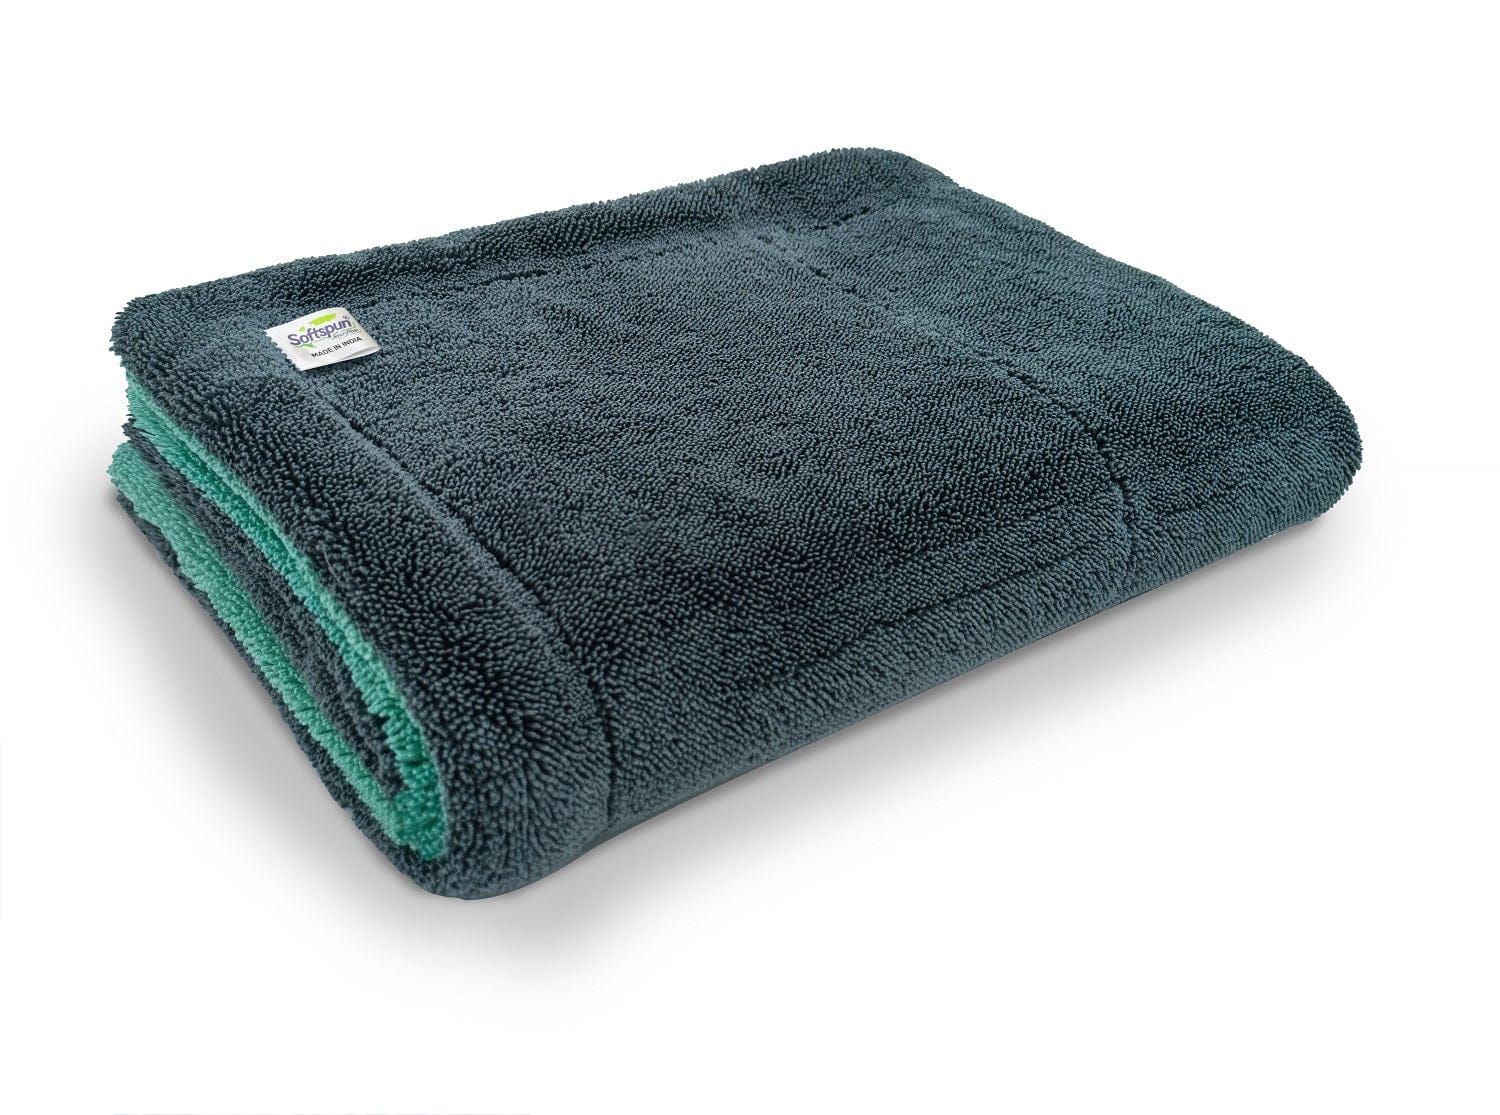 SOFTSPUN Microfiber Cloth for Car - 1600 GSM, Twisted Loop Super Absorbent Towel - Edgeless Design with Plush Pile and Lint Free Cloth for Drying and Detailing.